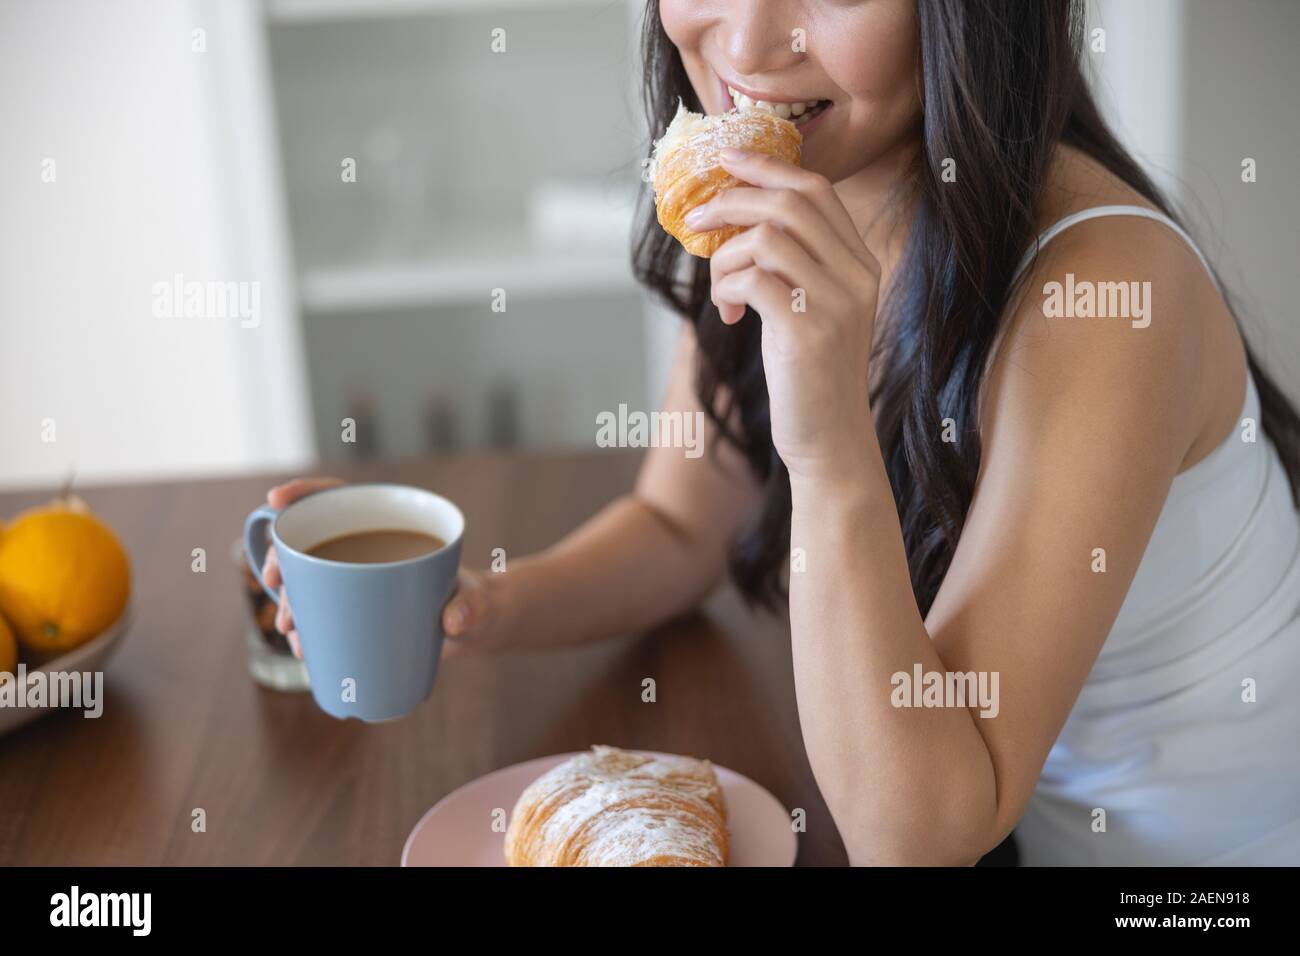 Girl with long hair sitting at the table Stock Photo